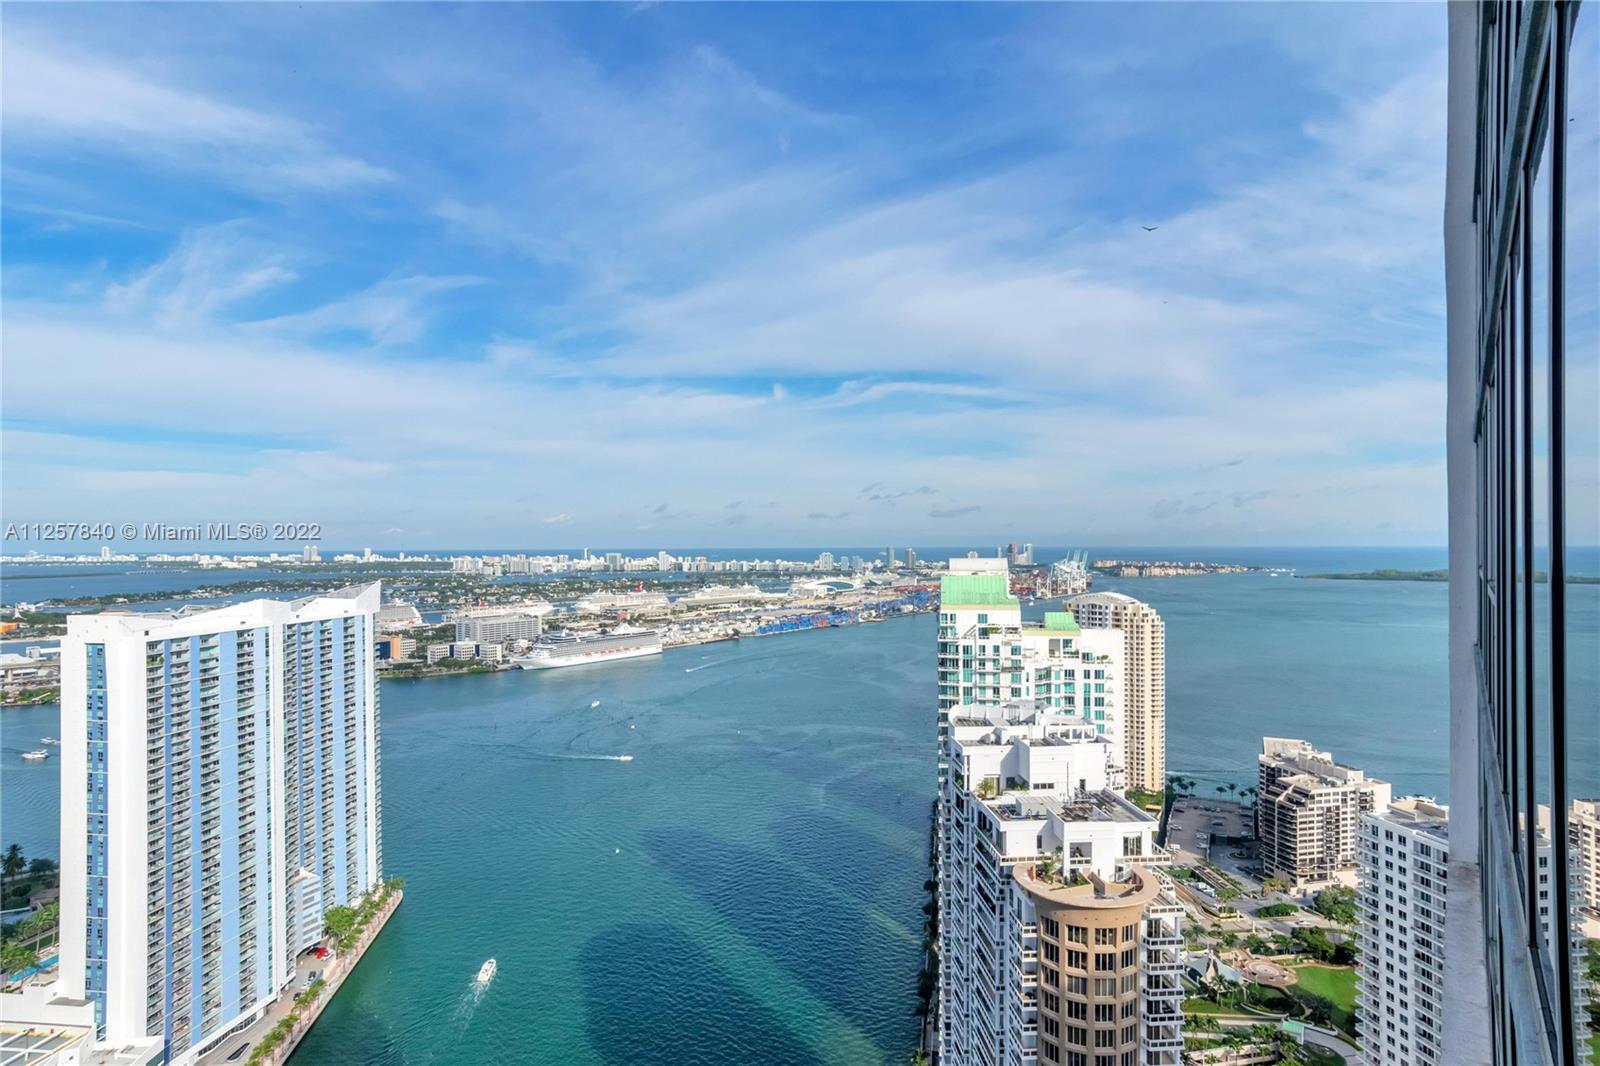 465  Brickell Ave #5002 For Sale A11257840, FL